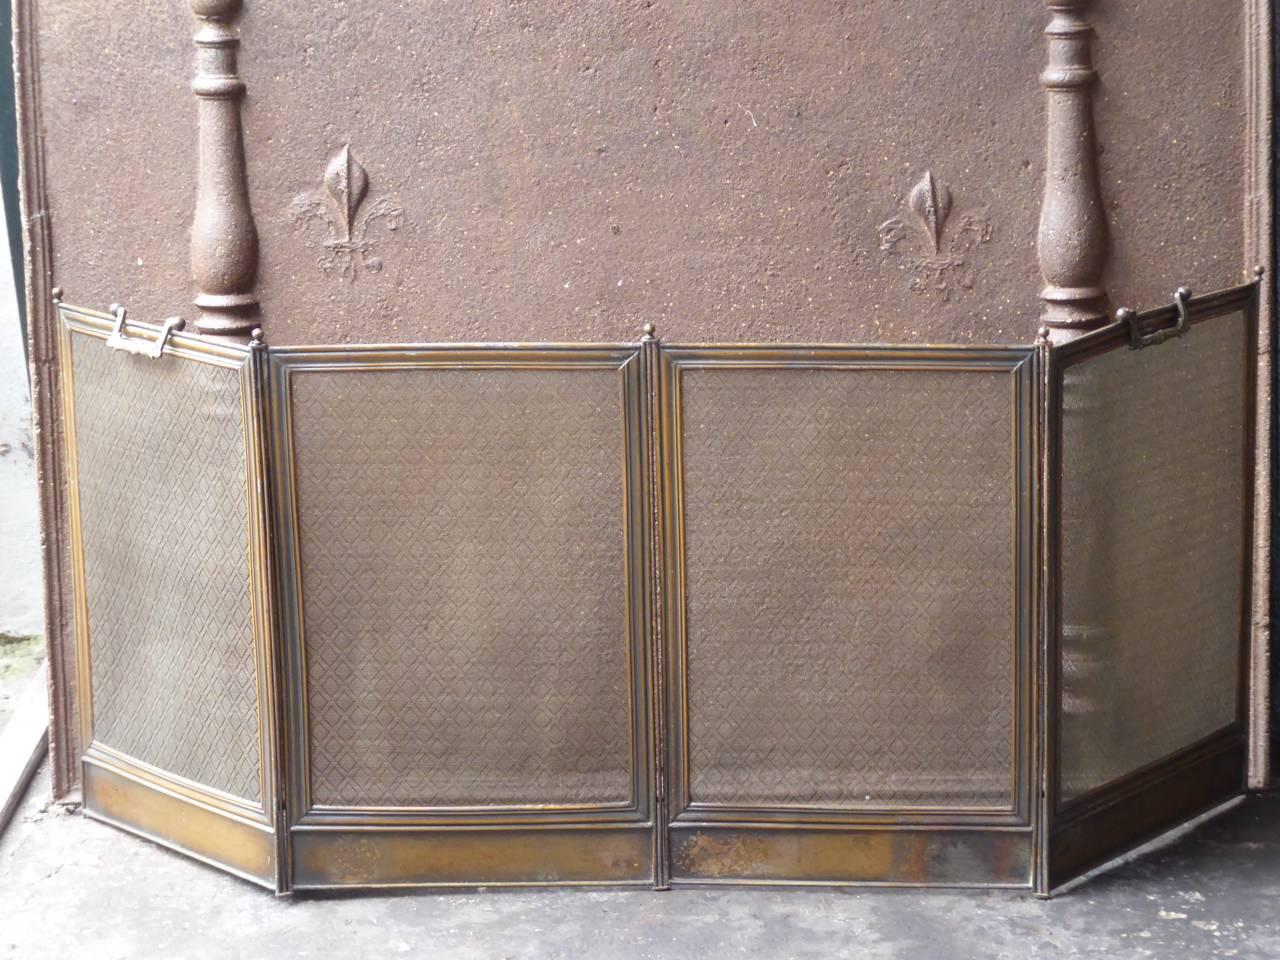 French Napoleon III fireplace screen made of brass, iron and iron mesh.

We have a unique and specialized collection of antique and used fireplace accessories consisting of more than 1000 listings at 1stdibs. Amongst others, we always have 300+